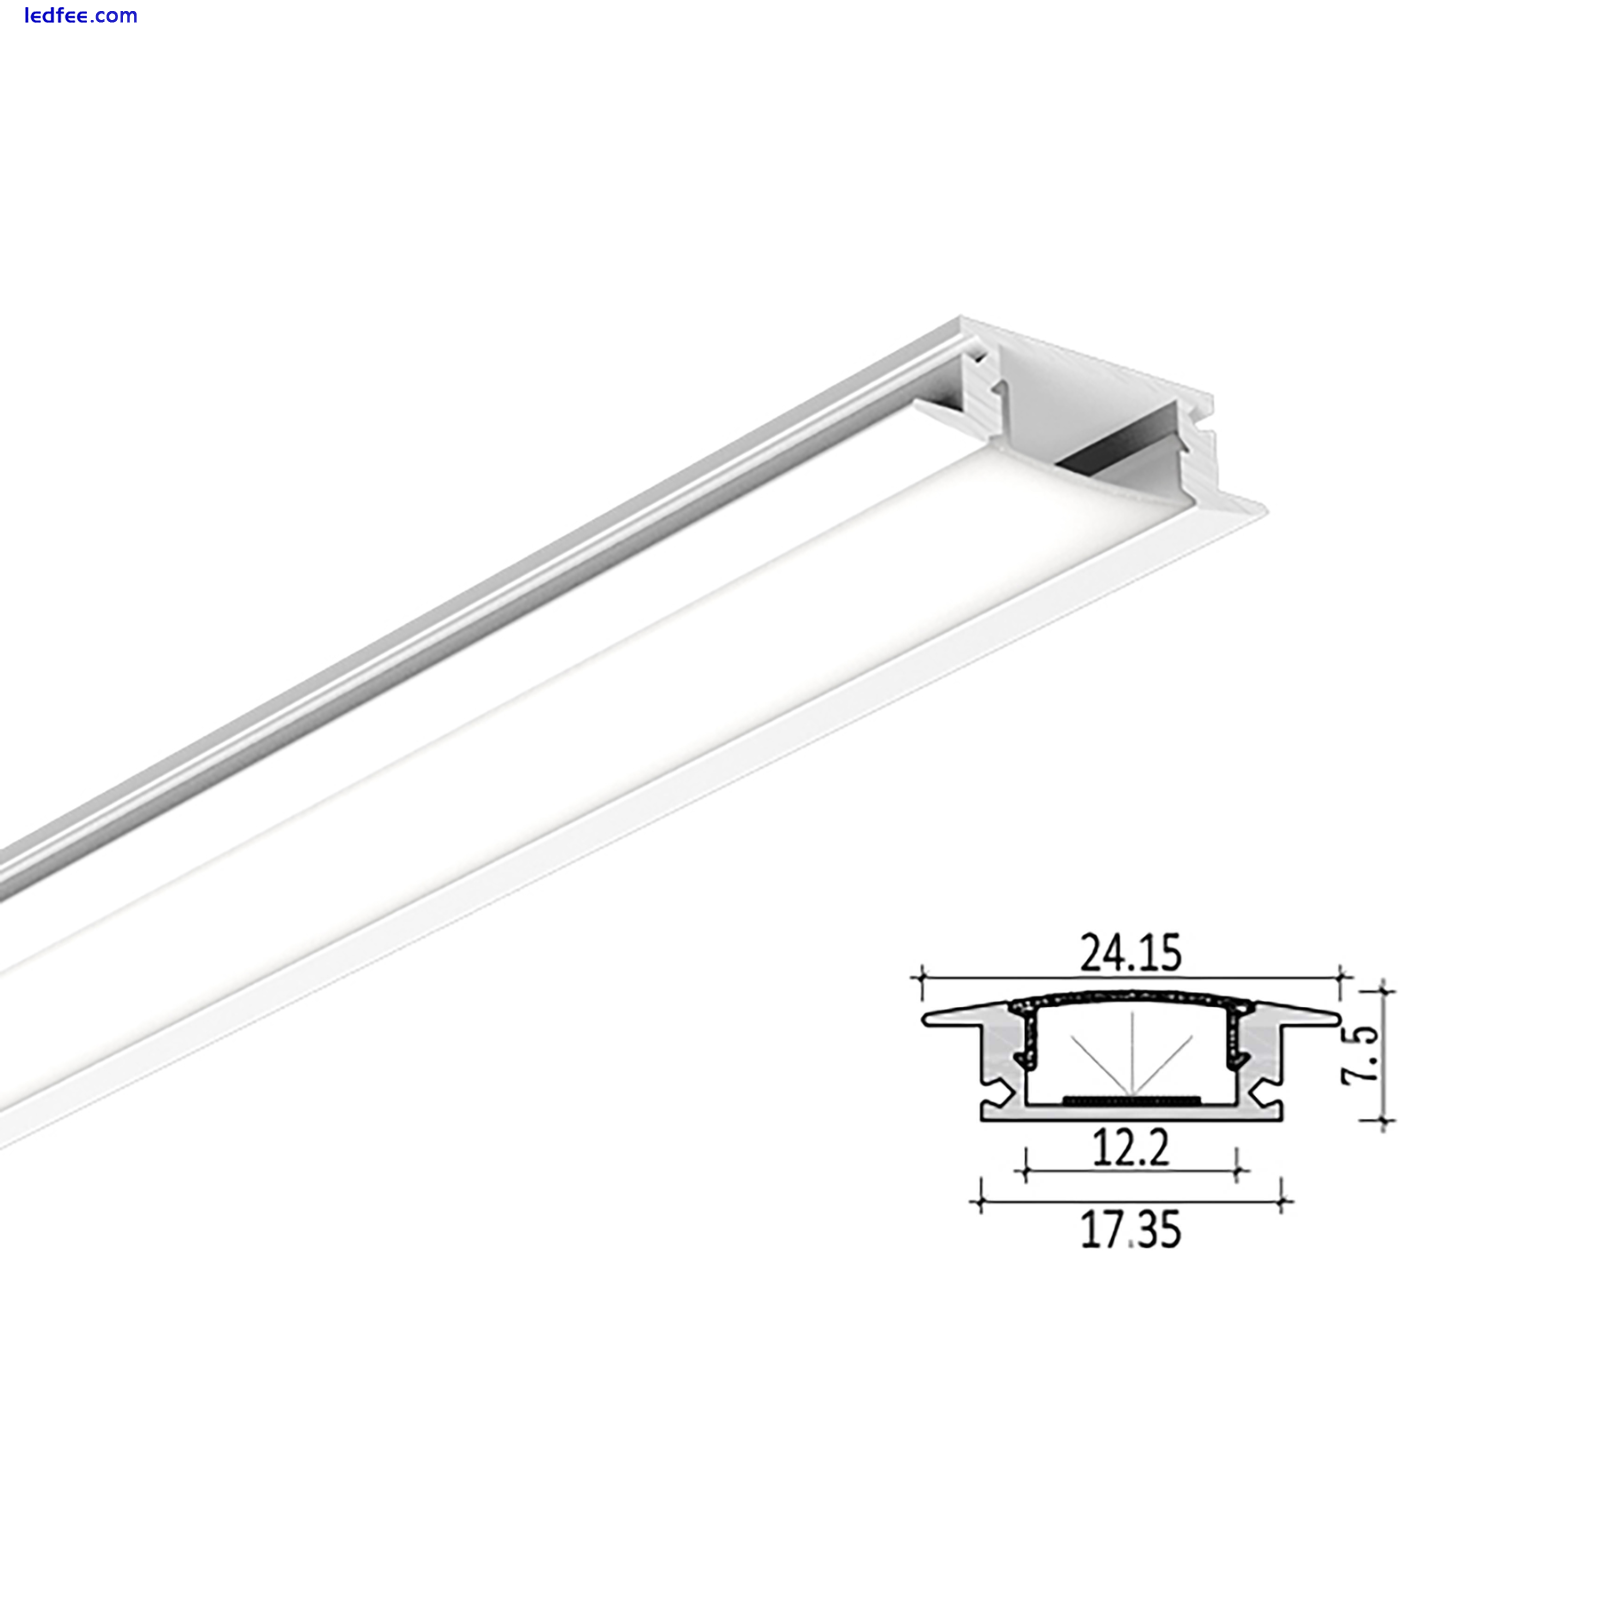 1M 2M LED Profile Aluminium Channel Extrusion Housing Track For LED Strip Light 1 